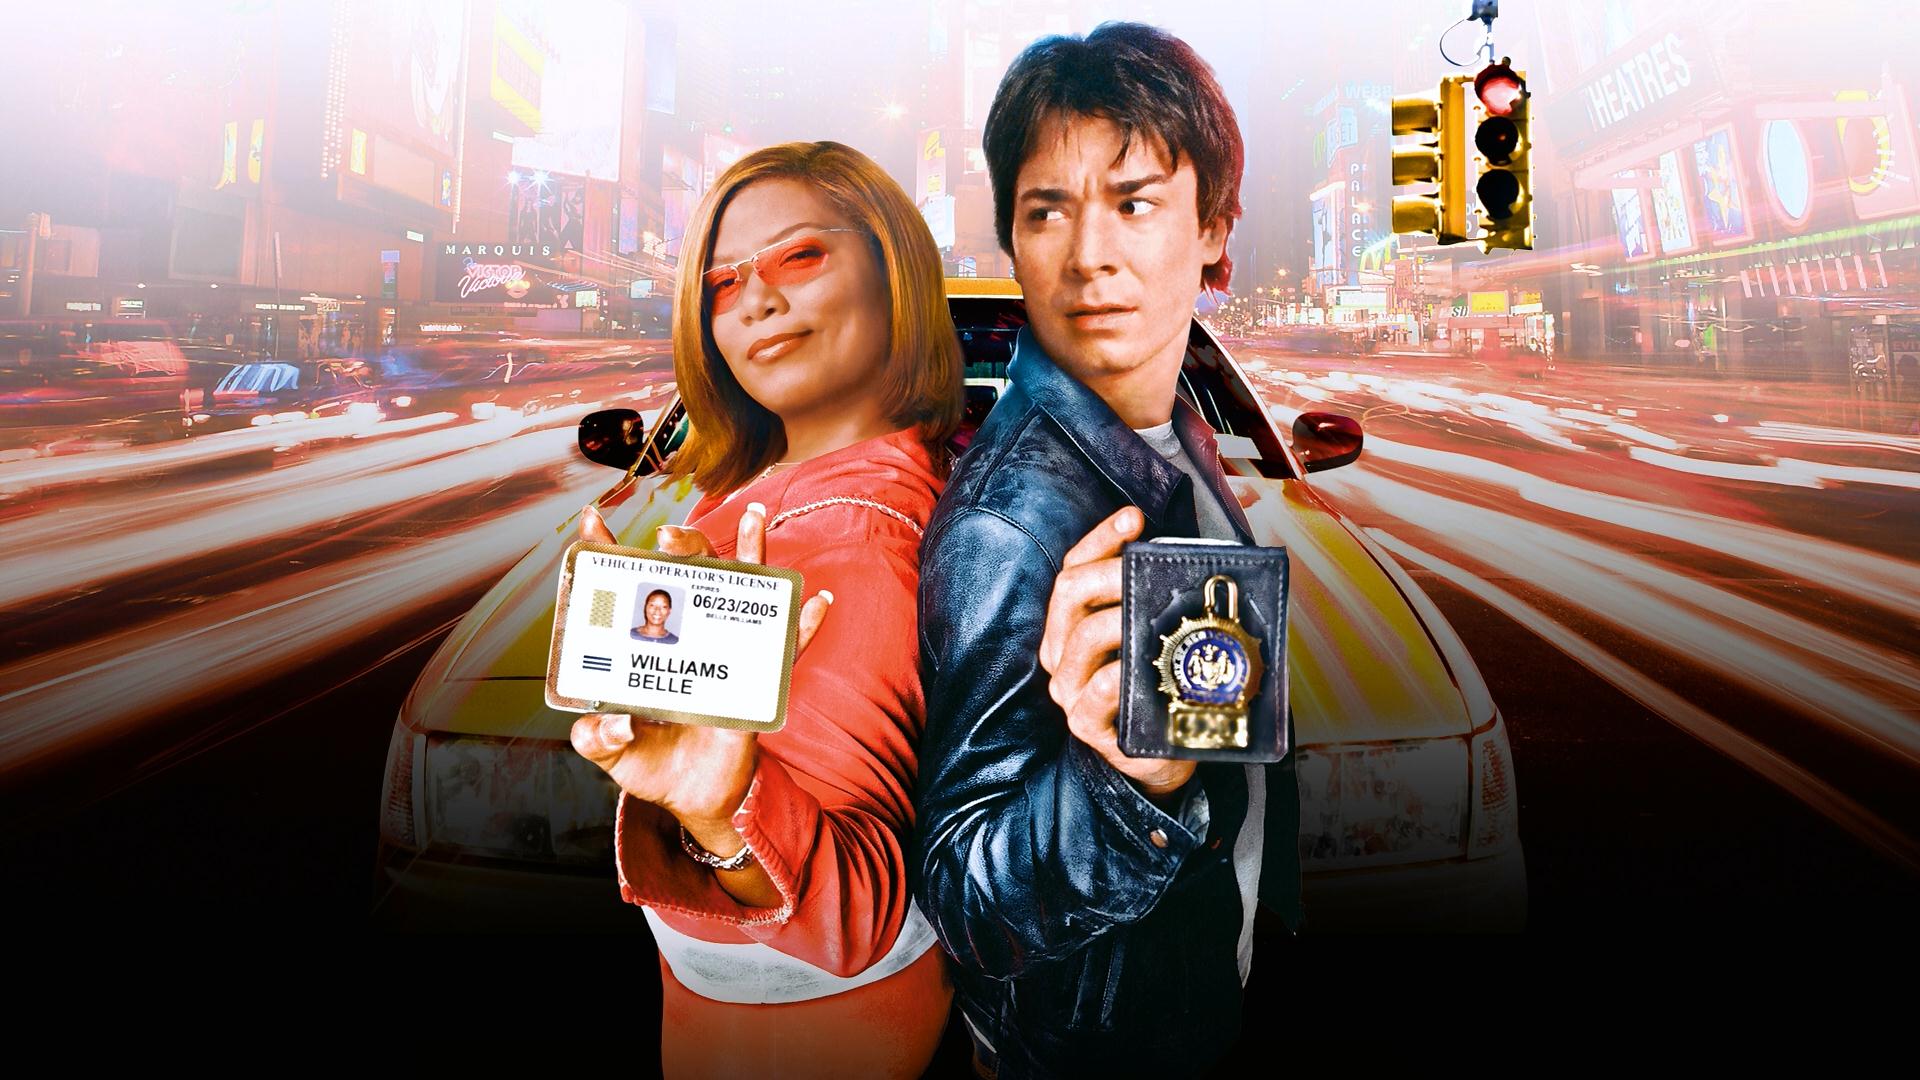 Movie Taxi (2004) HD Wallpaper | Background Image